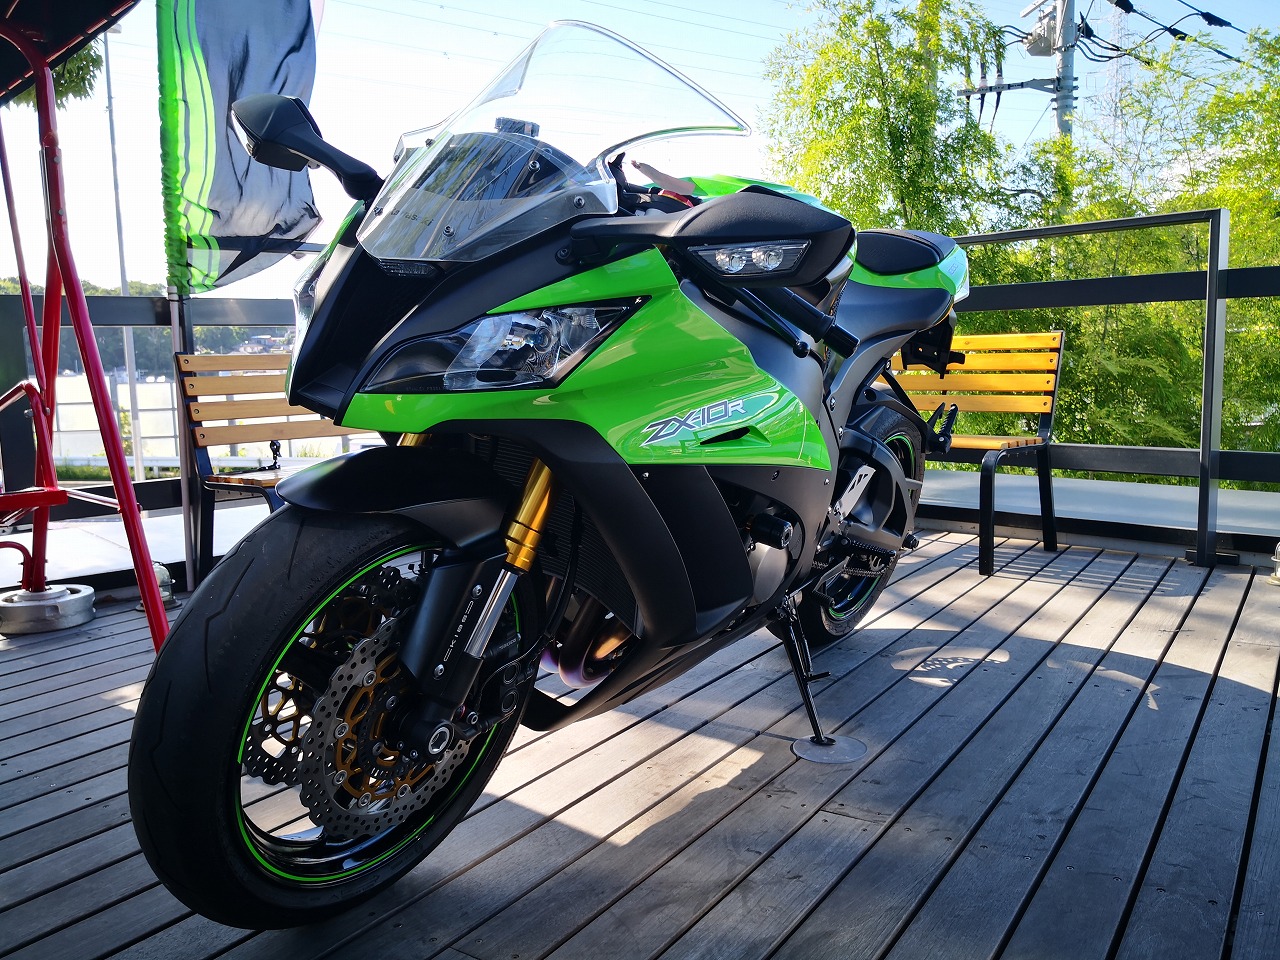 zx10r 2020年式 - バイク